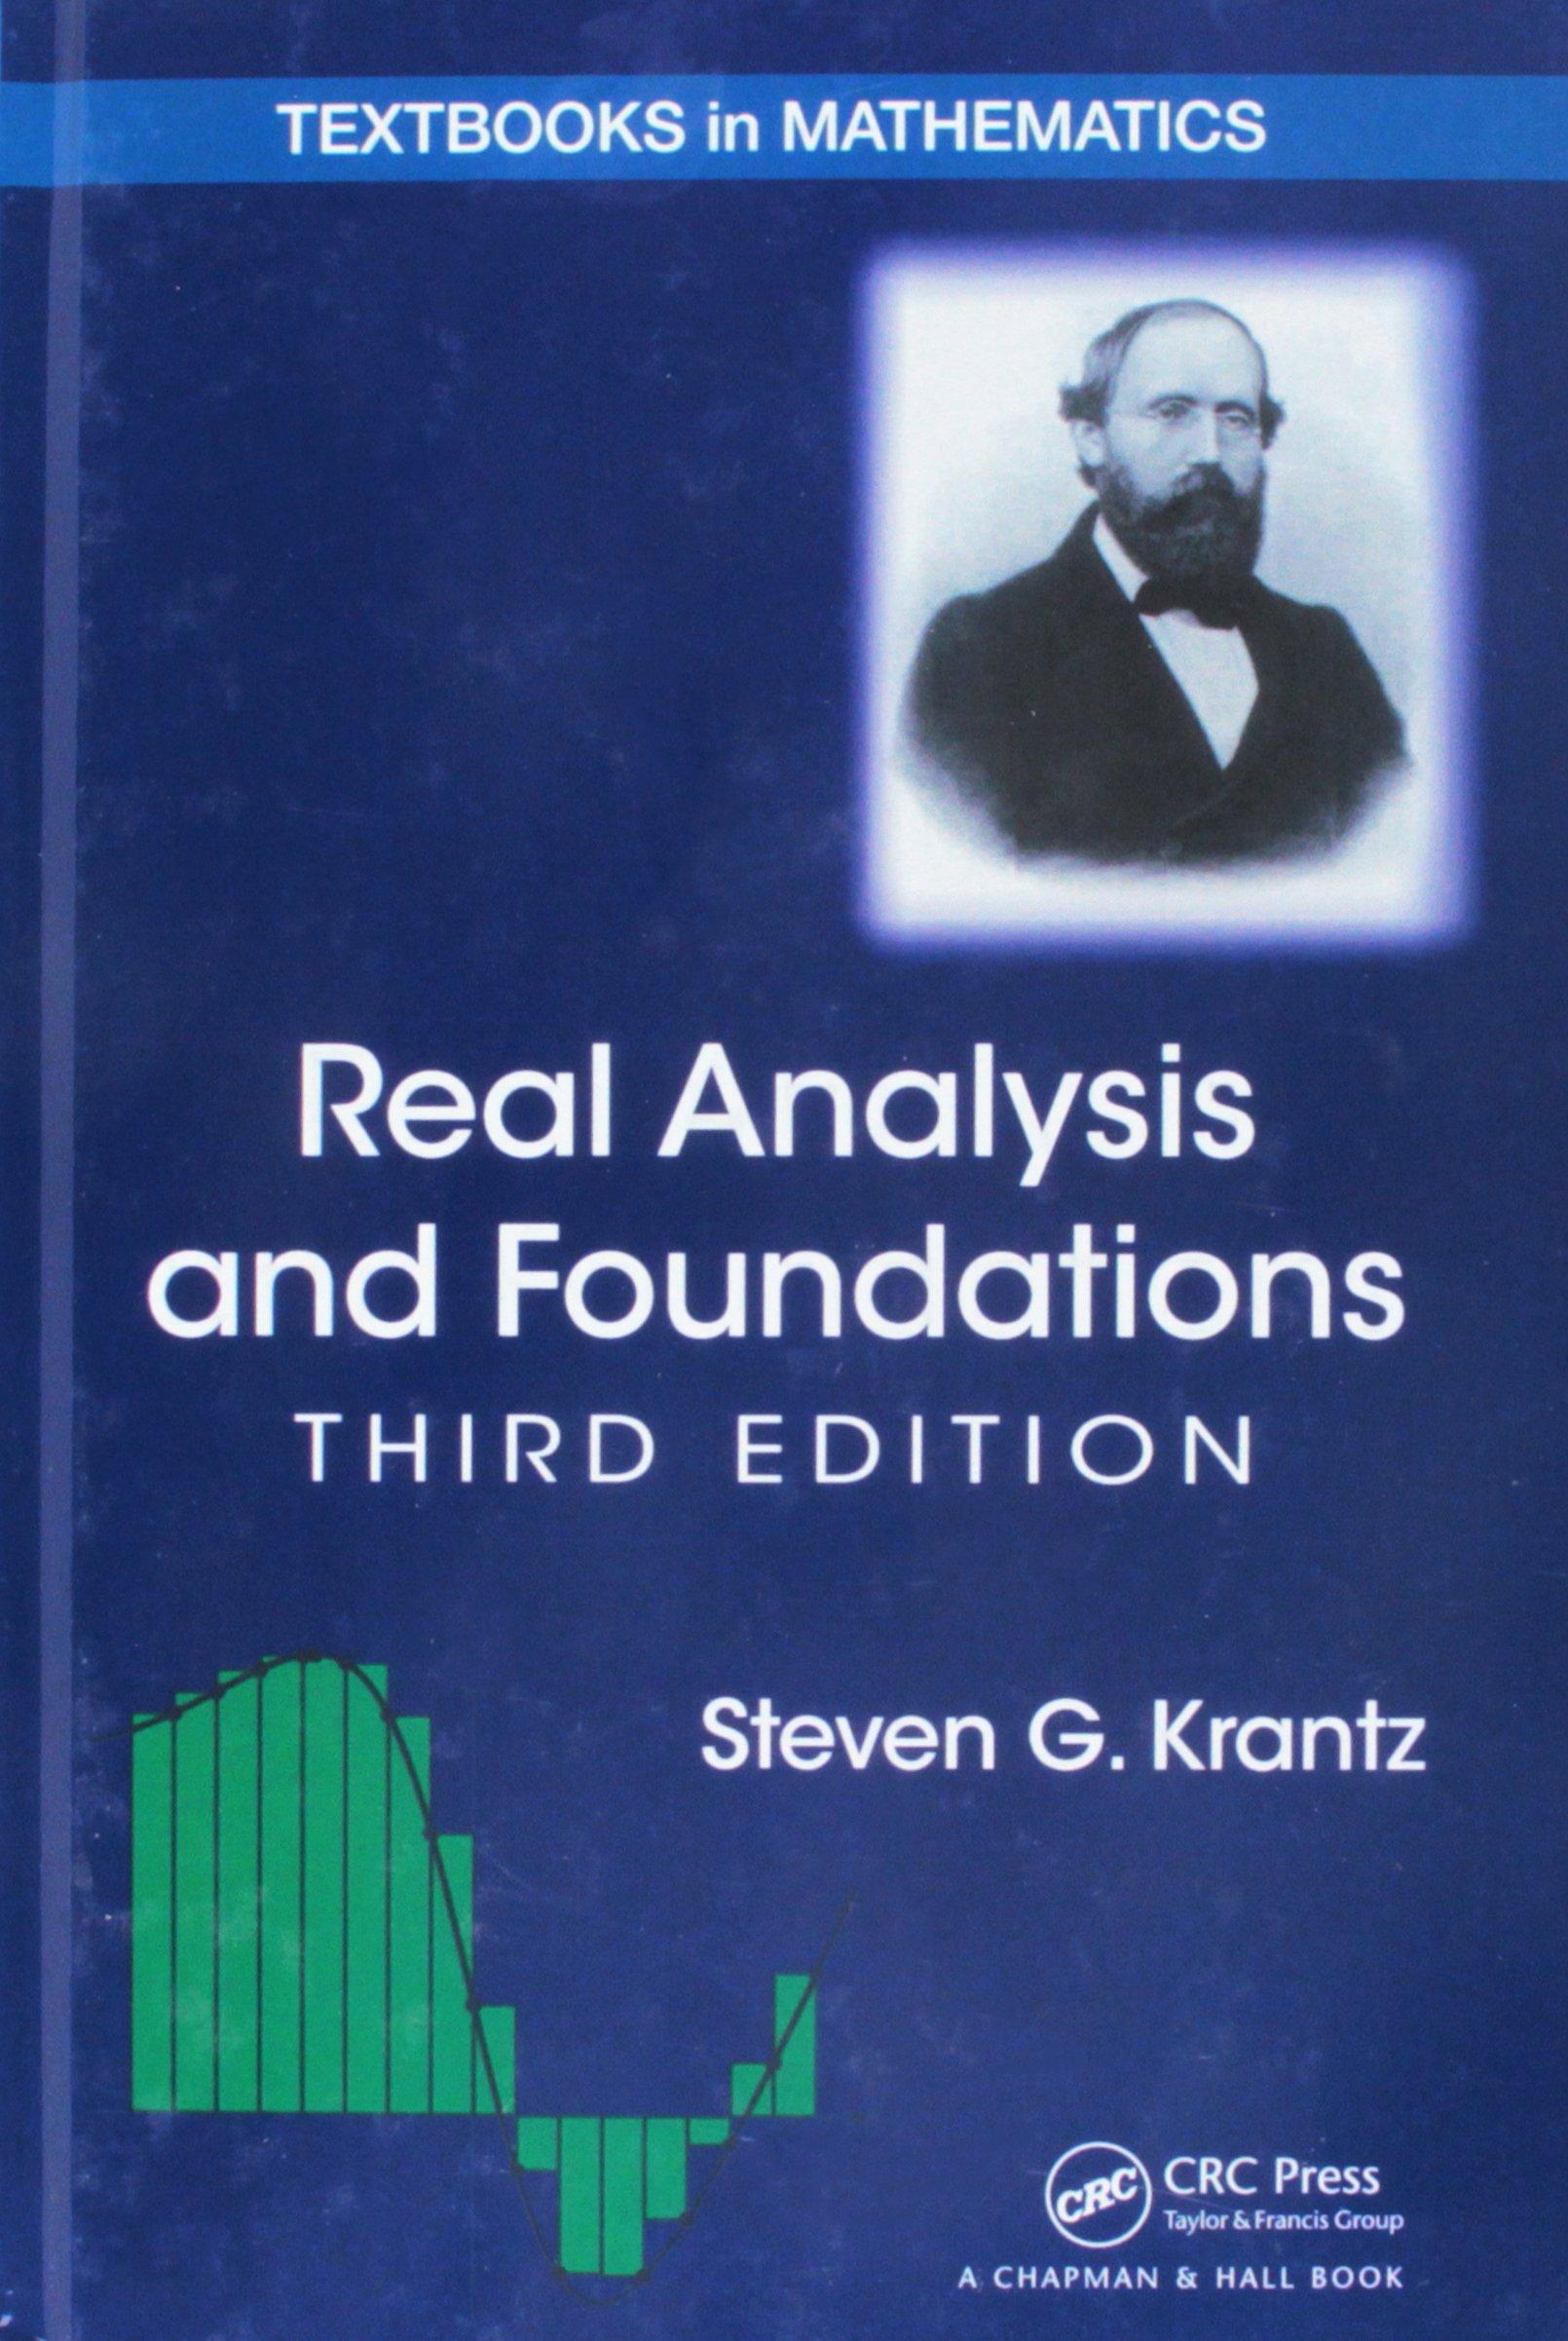 real analysis and foundations 3rd edition steven g. krantz 1466587318, 9781466587311